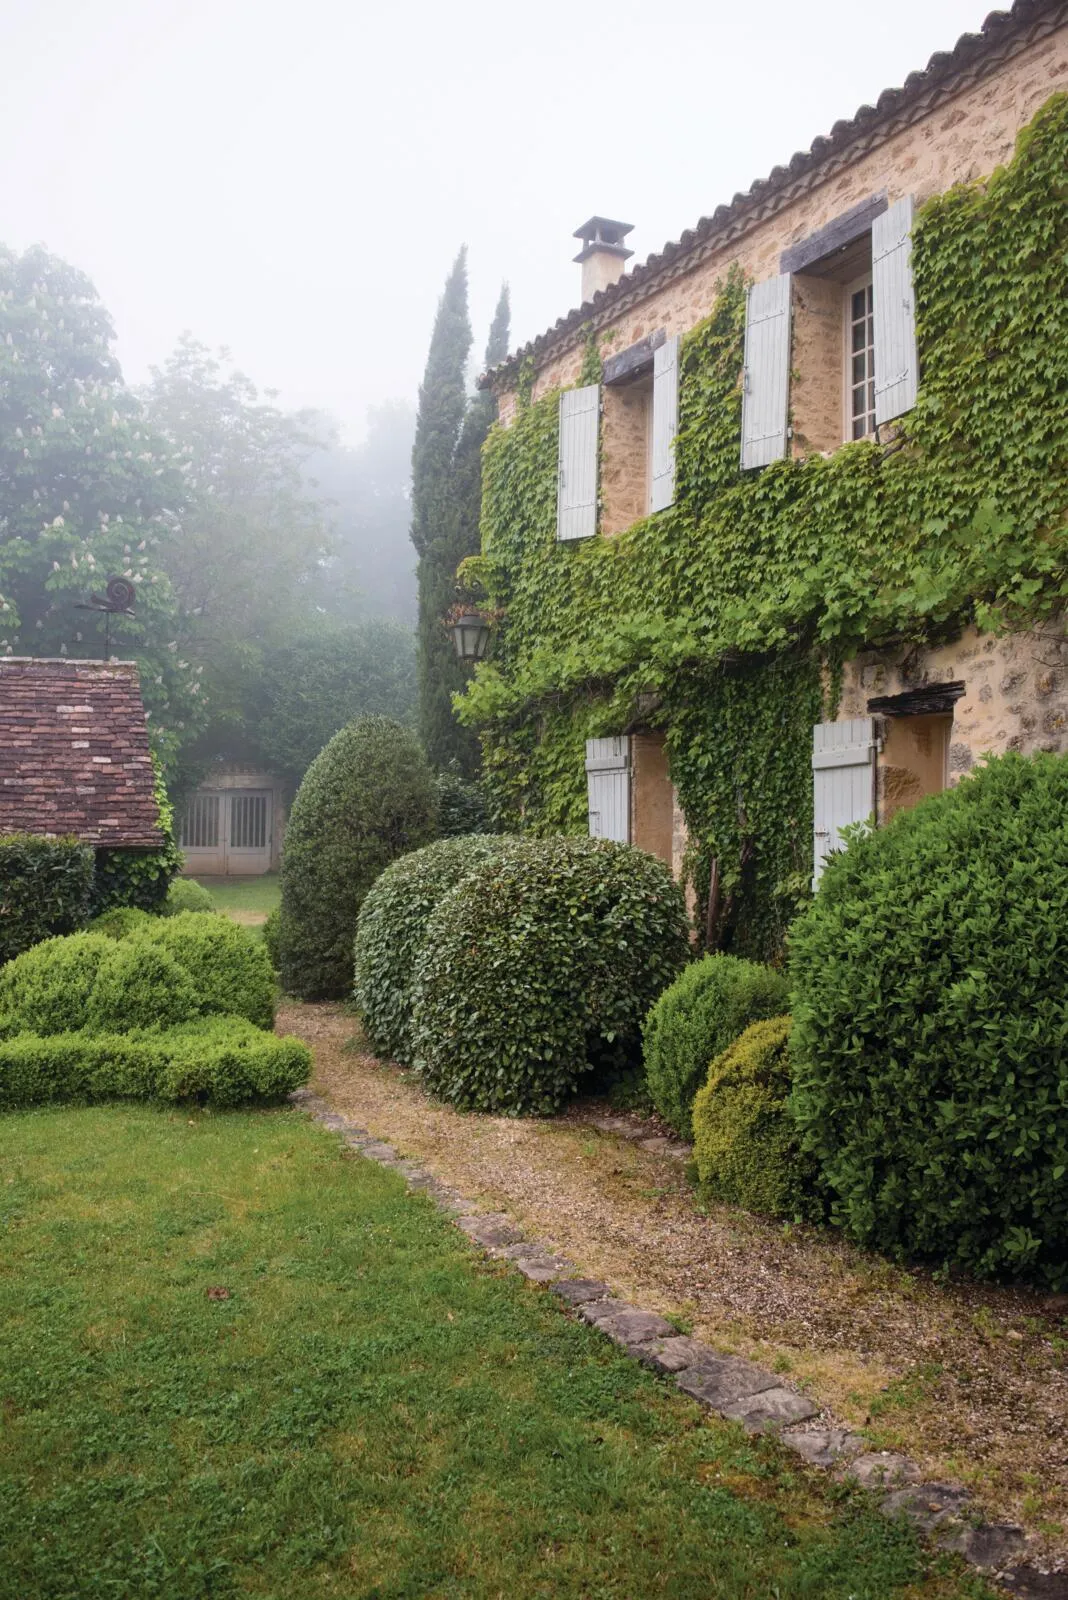 15th century farmhouse in south-west France, exterior and garden.